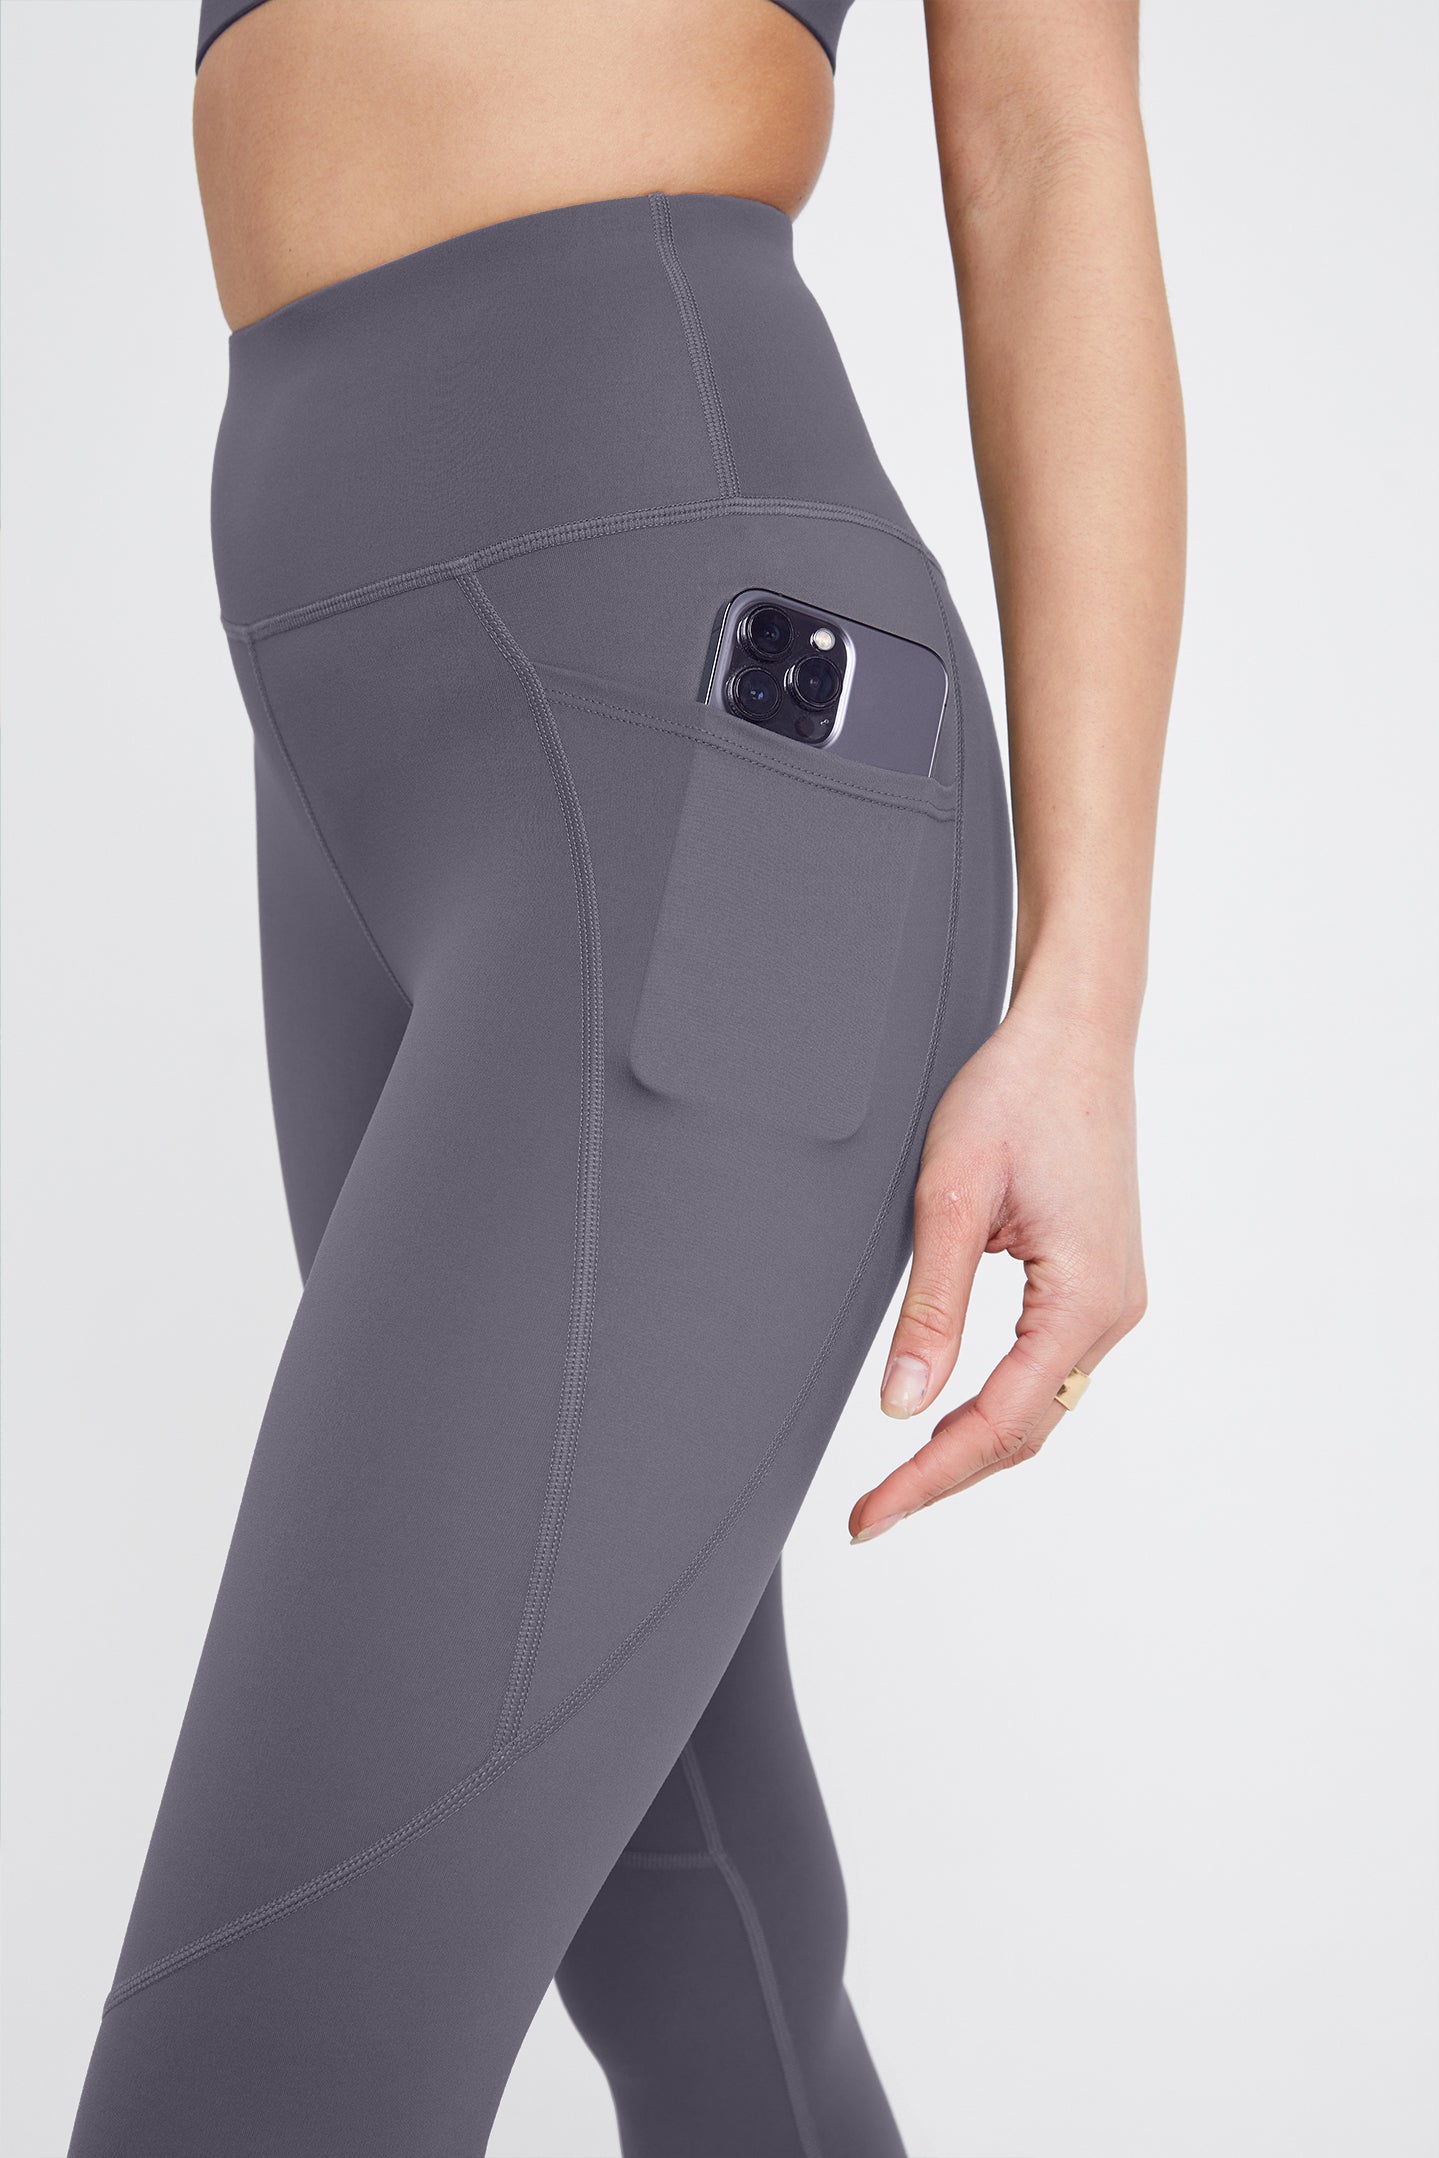 Buy Leggings With Pockets Online in India | Myntra